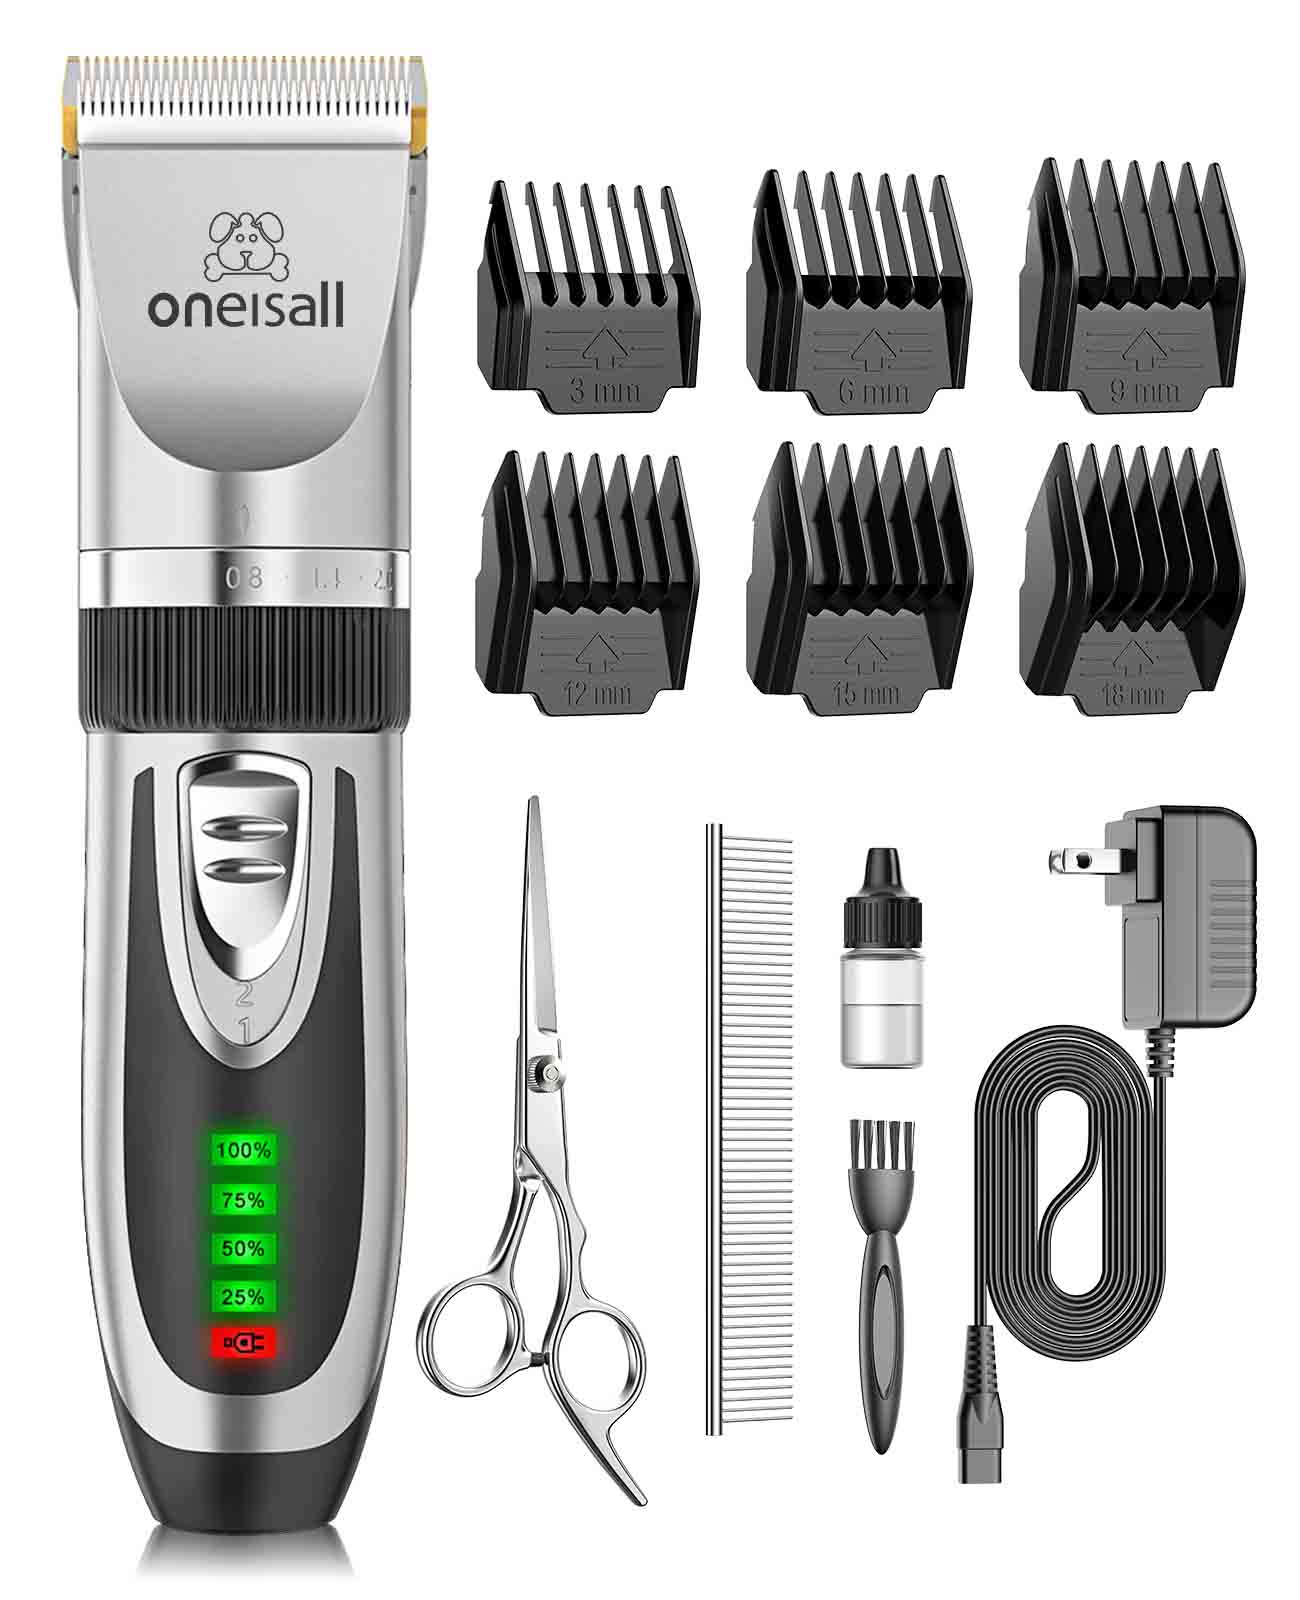 X2 - Oneisall 2 Speed Dog Grooming Clippers with Double Blades